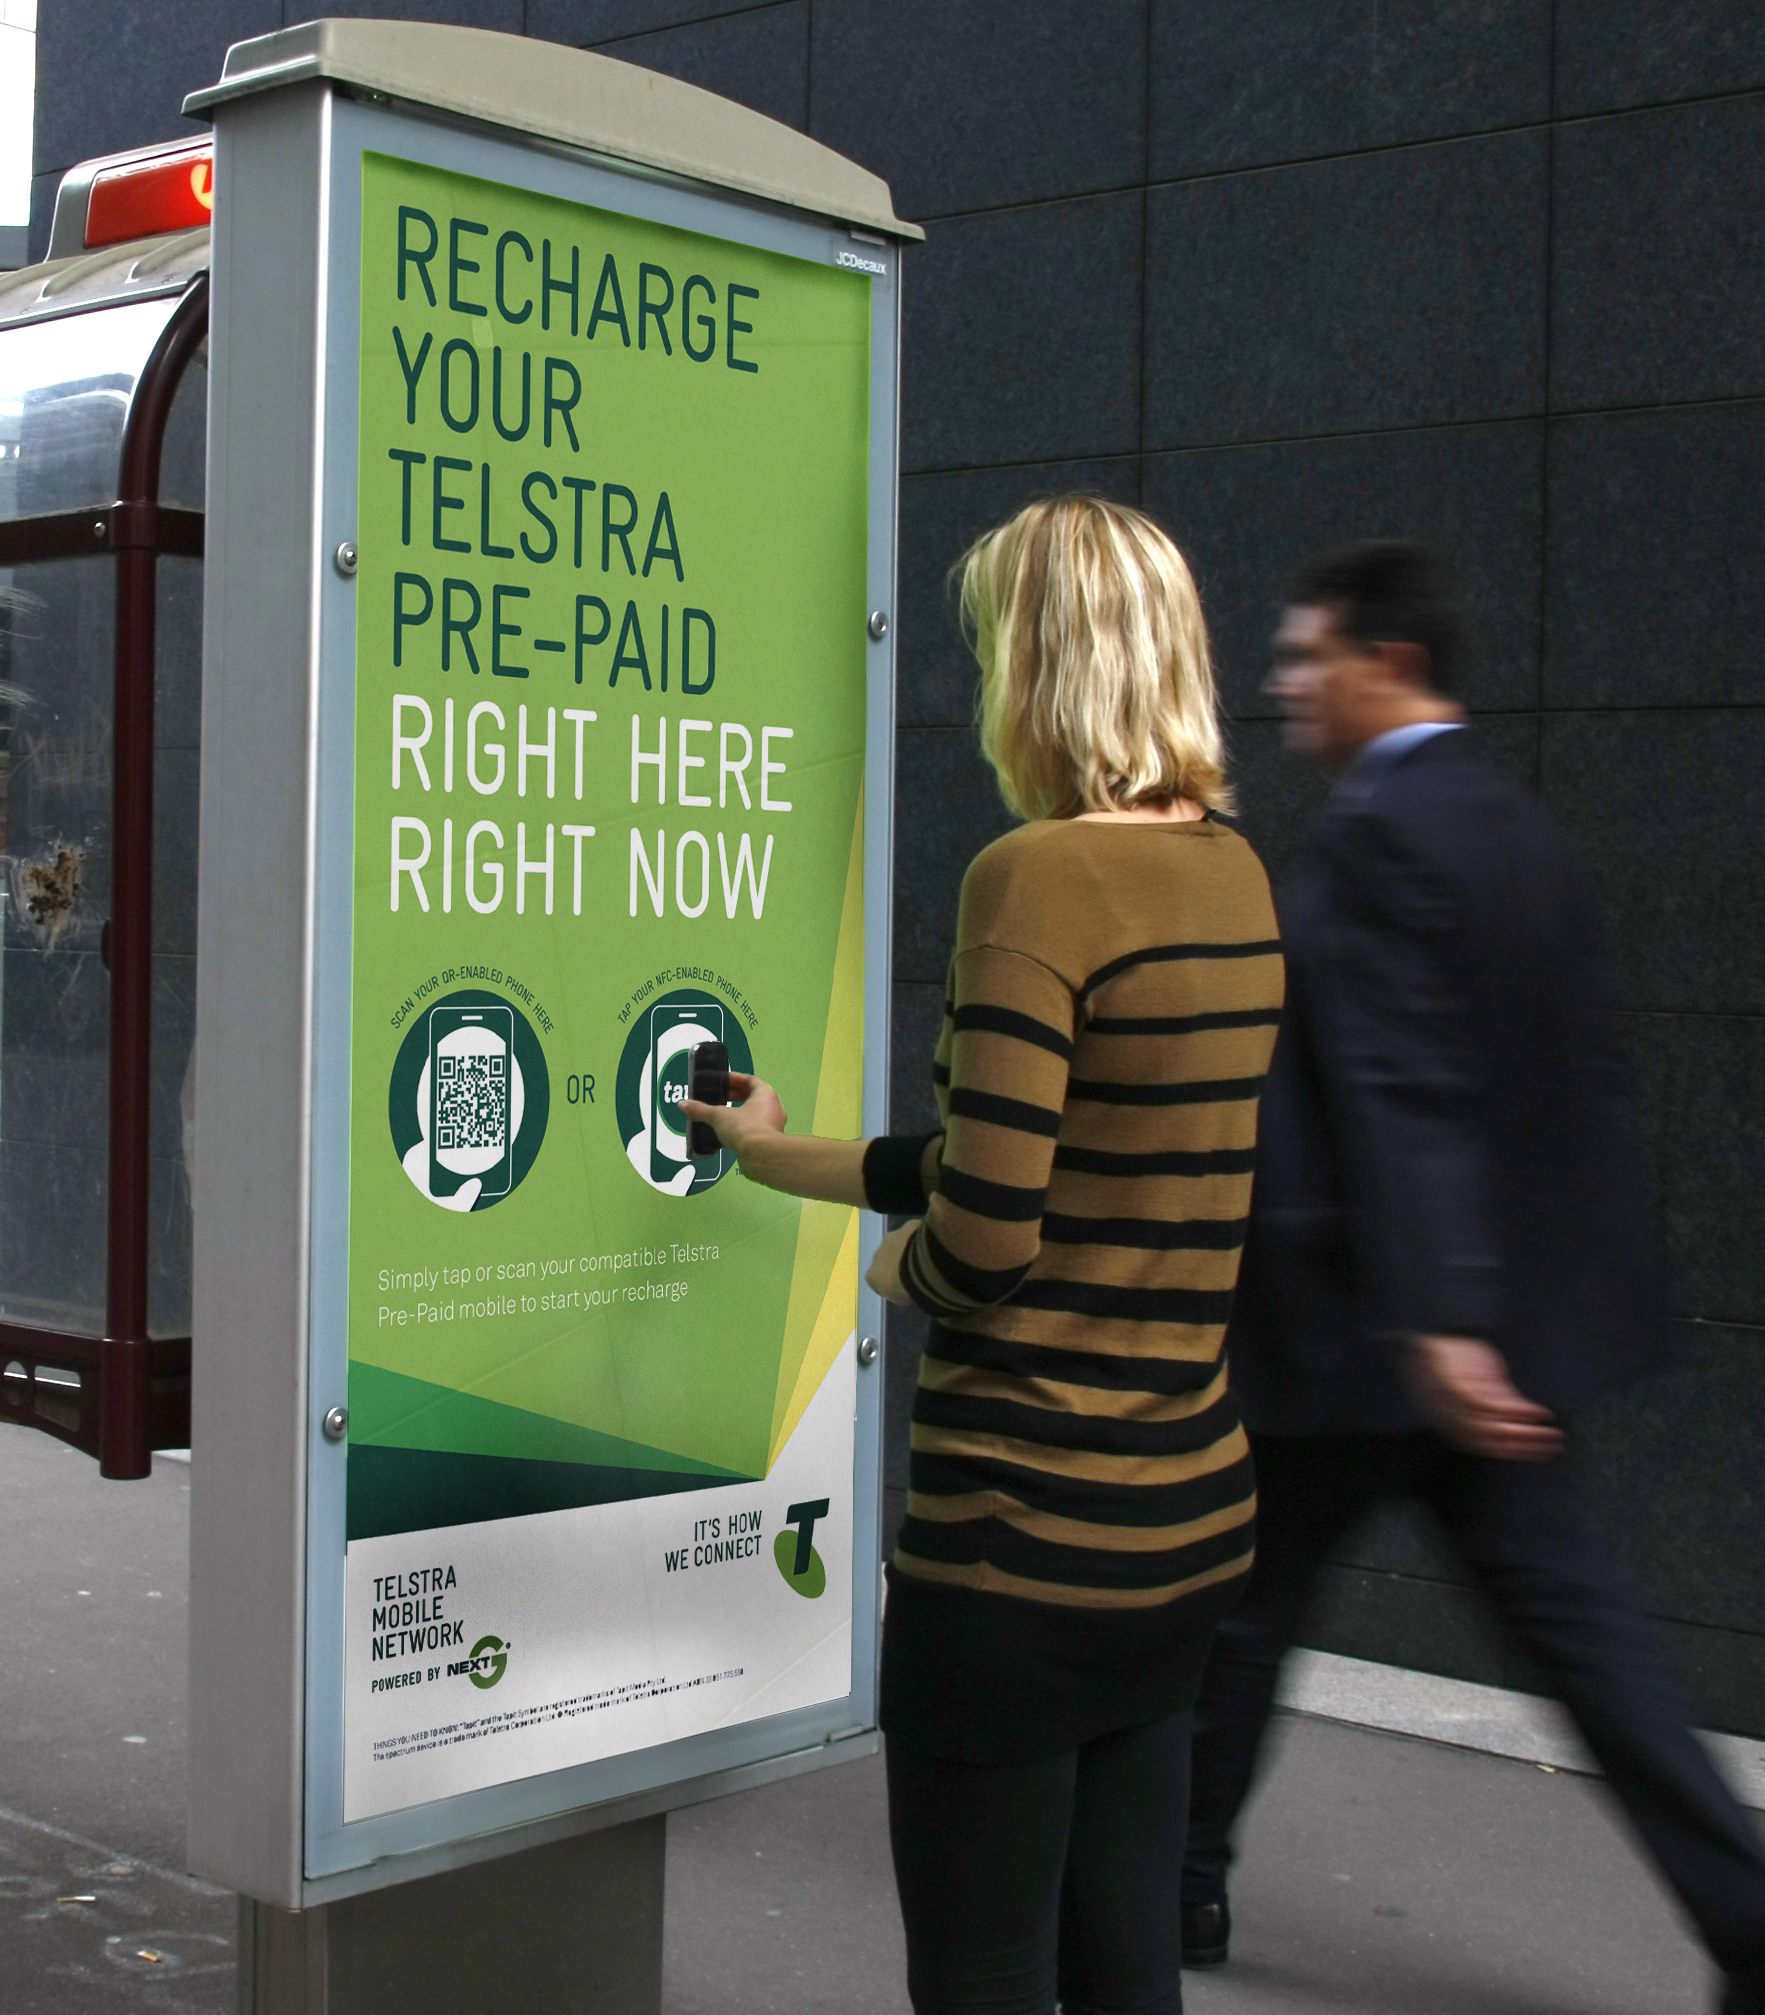 Australian Mobile Operator Telstra Expands NFC Tag Campaign